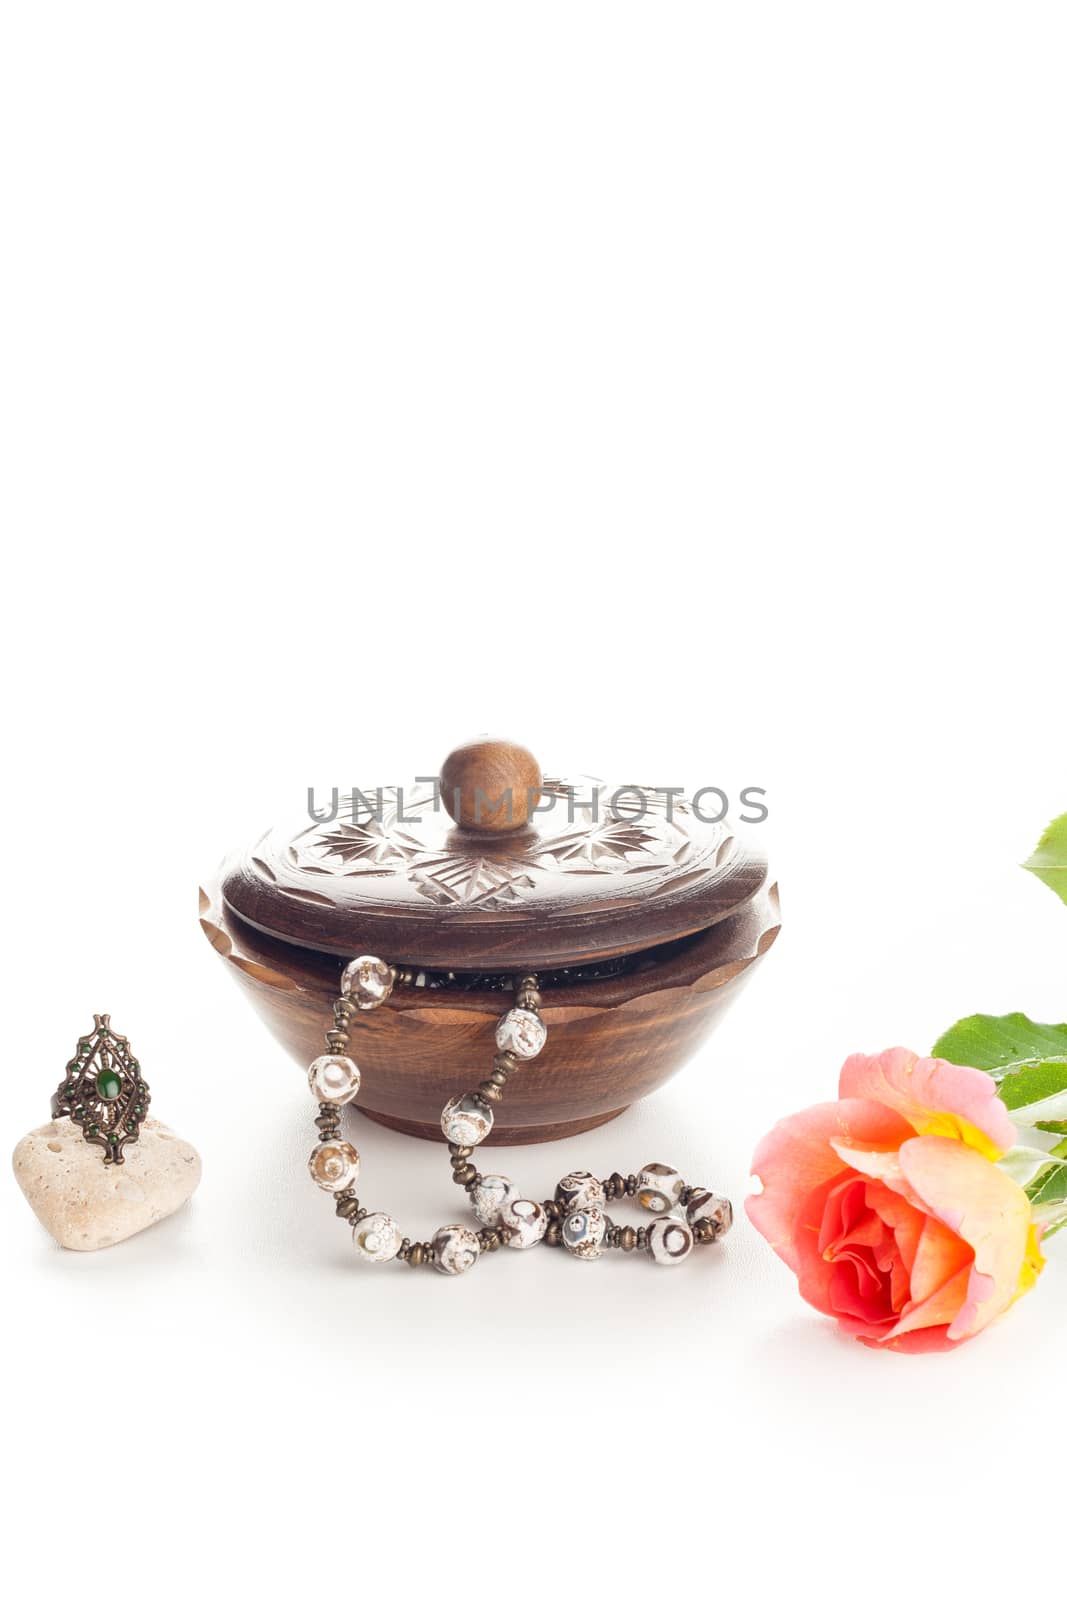 jewelry with box and rose by furo_felix